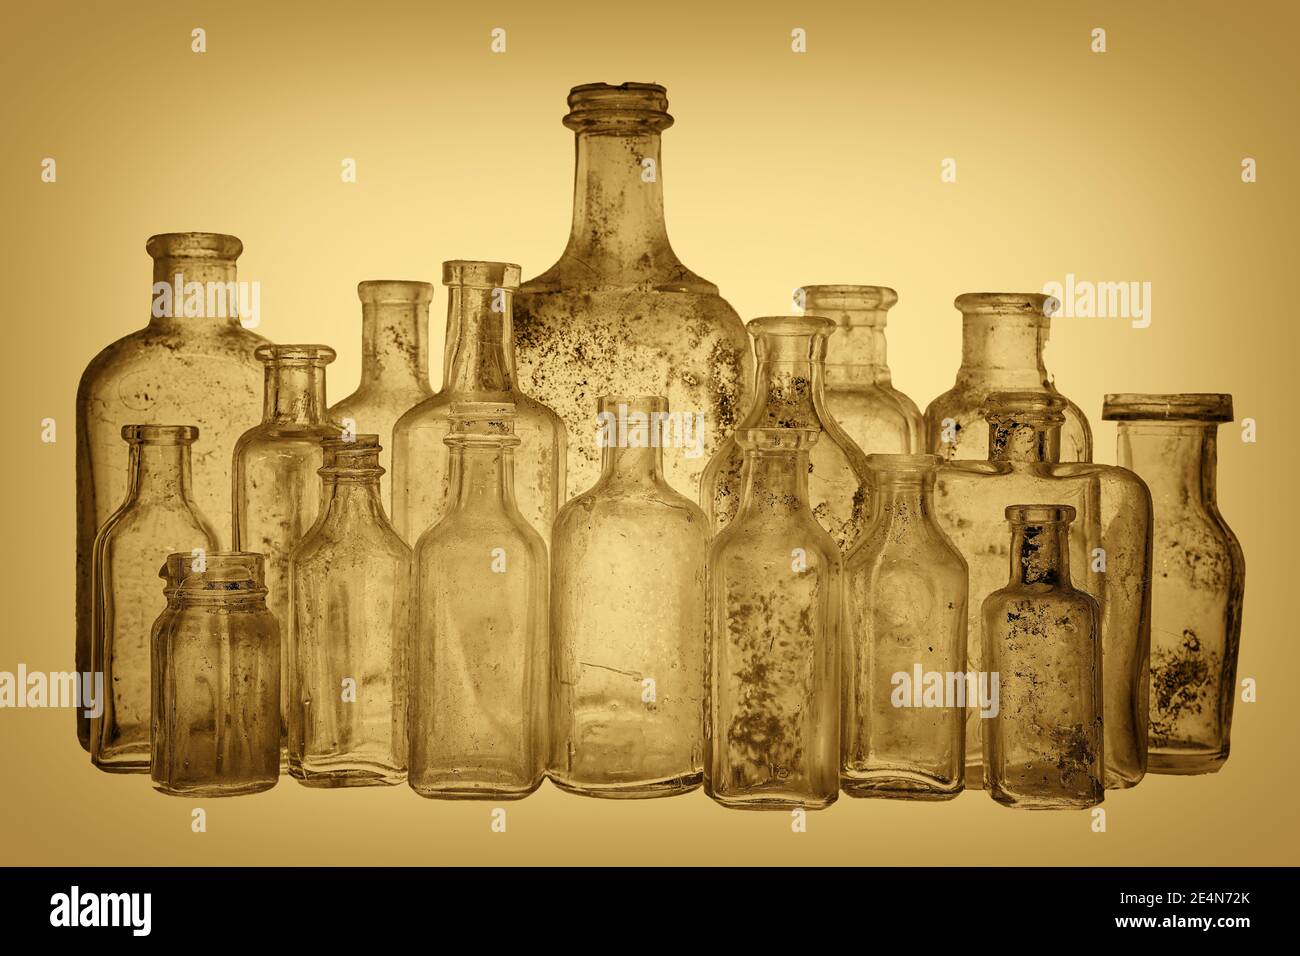 A collection of old antique bottles with a sepia tone. There are 18 ancient bottles, and they are dirty. Focus on the front row. Stock Photo